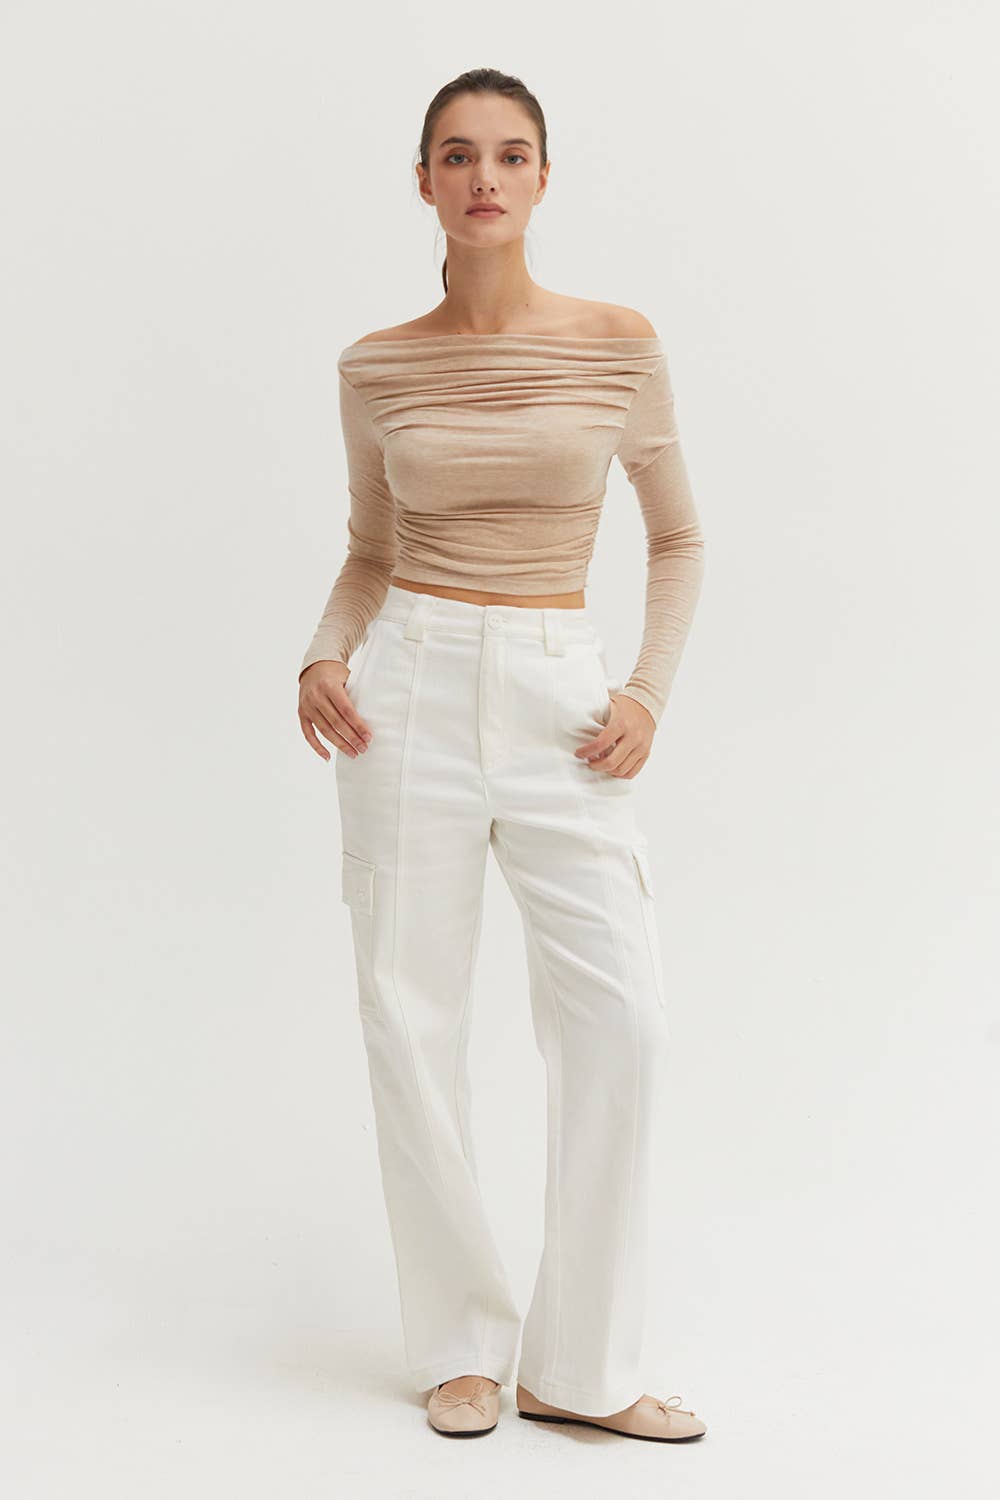 The Lana Ruched Off Shoulder Top in Oatmeal